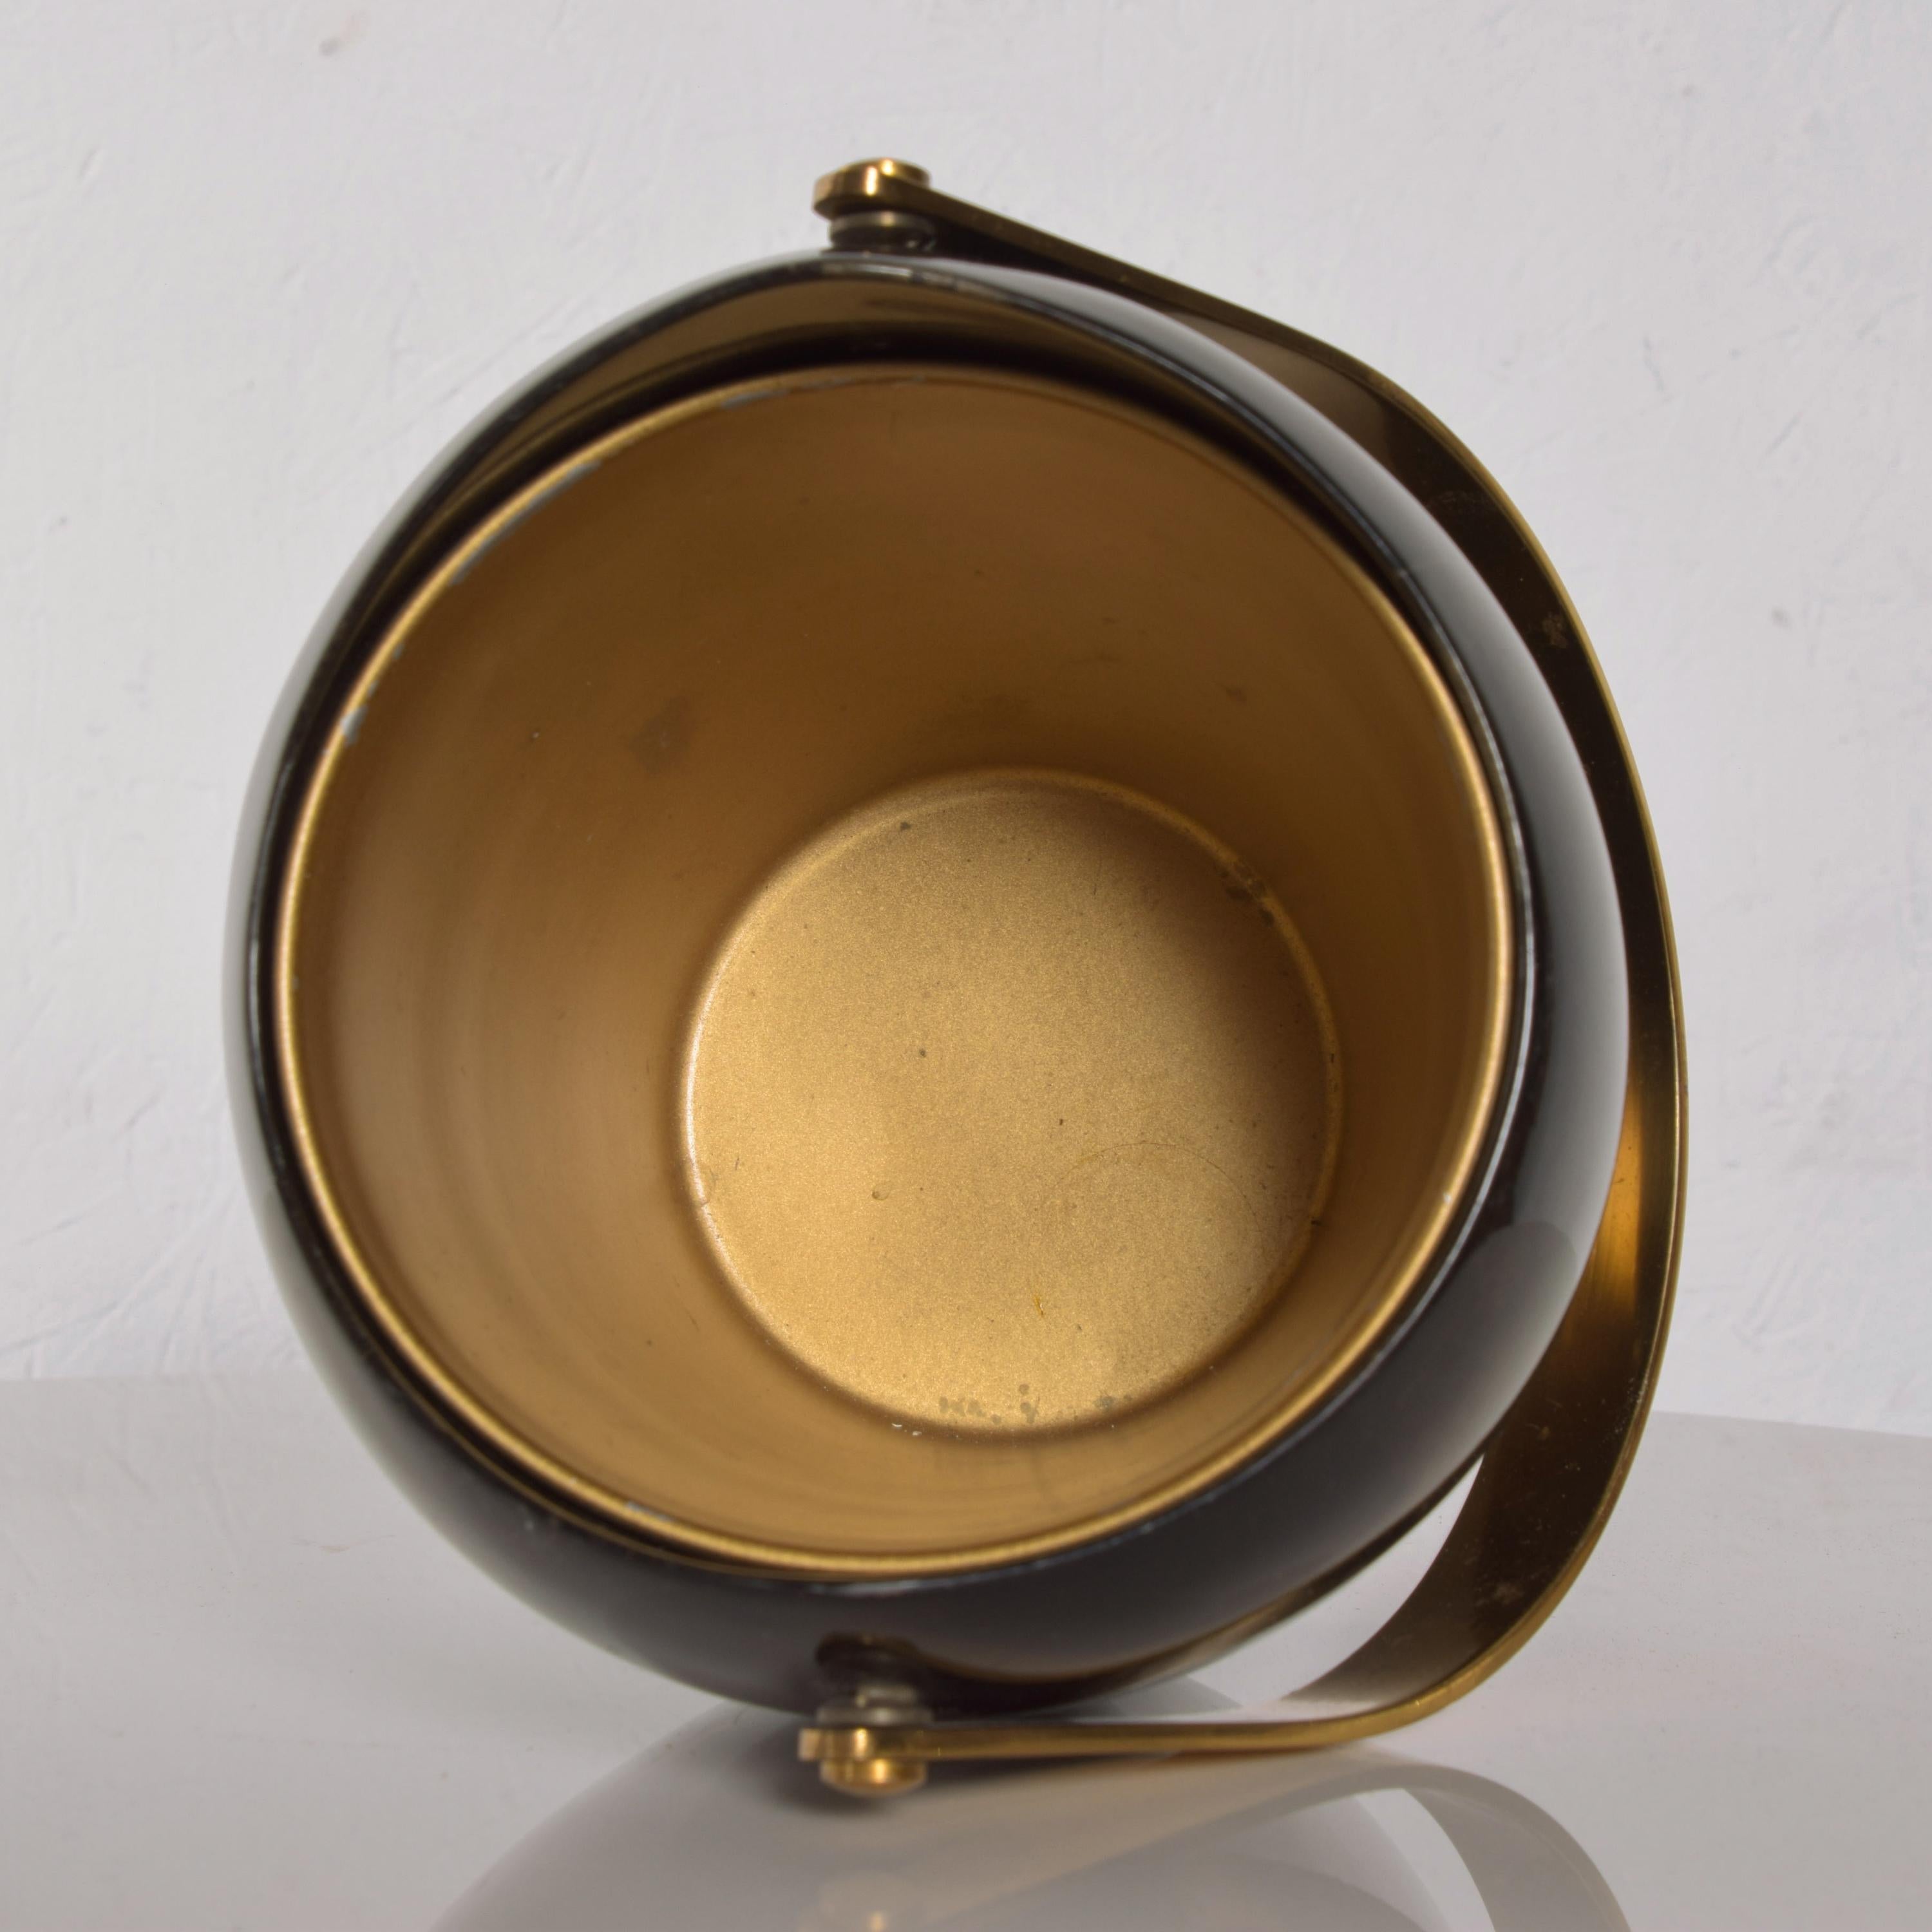 Ice Bucket
Luxurious Aldo Tura sculptural Italian ice bucket in goatskin & brass, ITALY 1960s
Interior of bucket is lustrous gold
Elegant sculptural goatskin with a brass handle. 
Stamped underneath Tura label. 
Color is dark green-gray.
Measures: